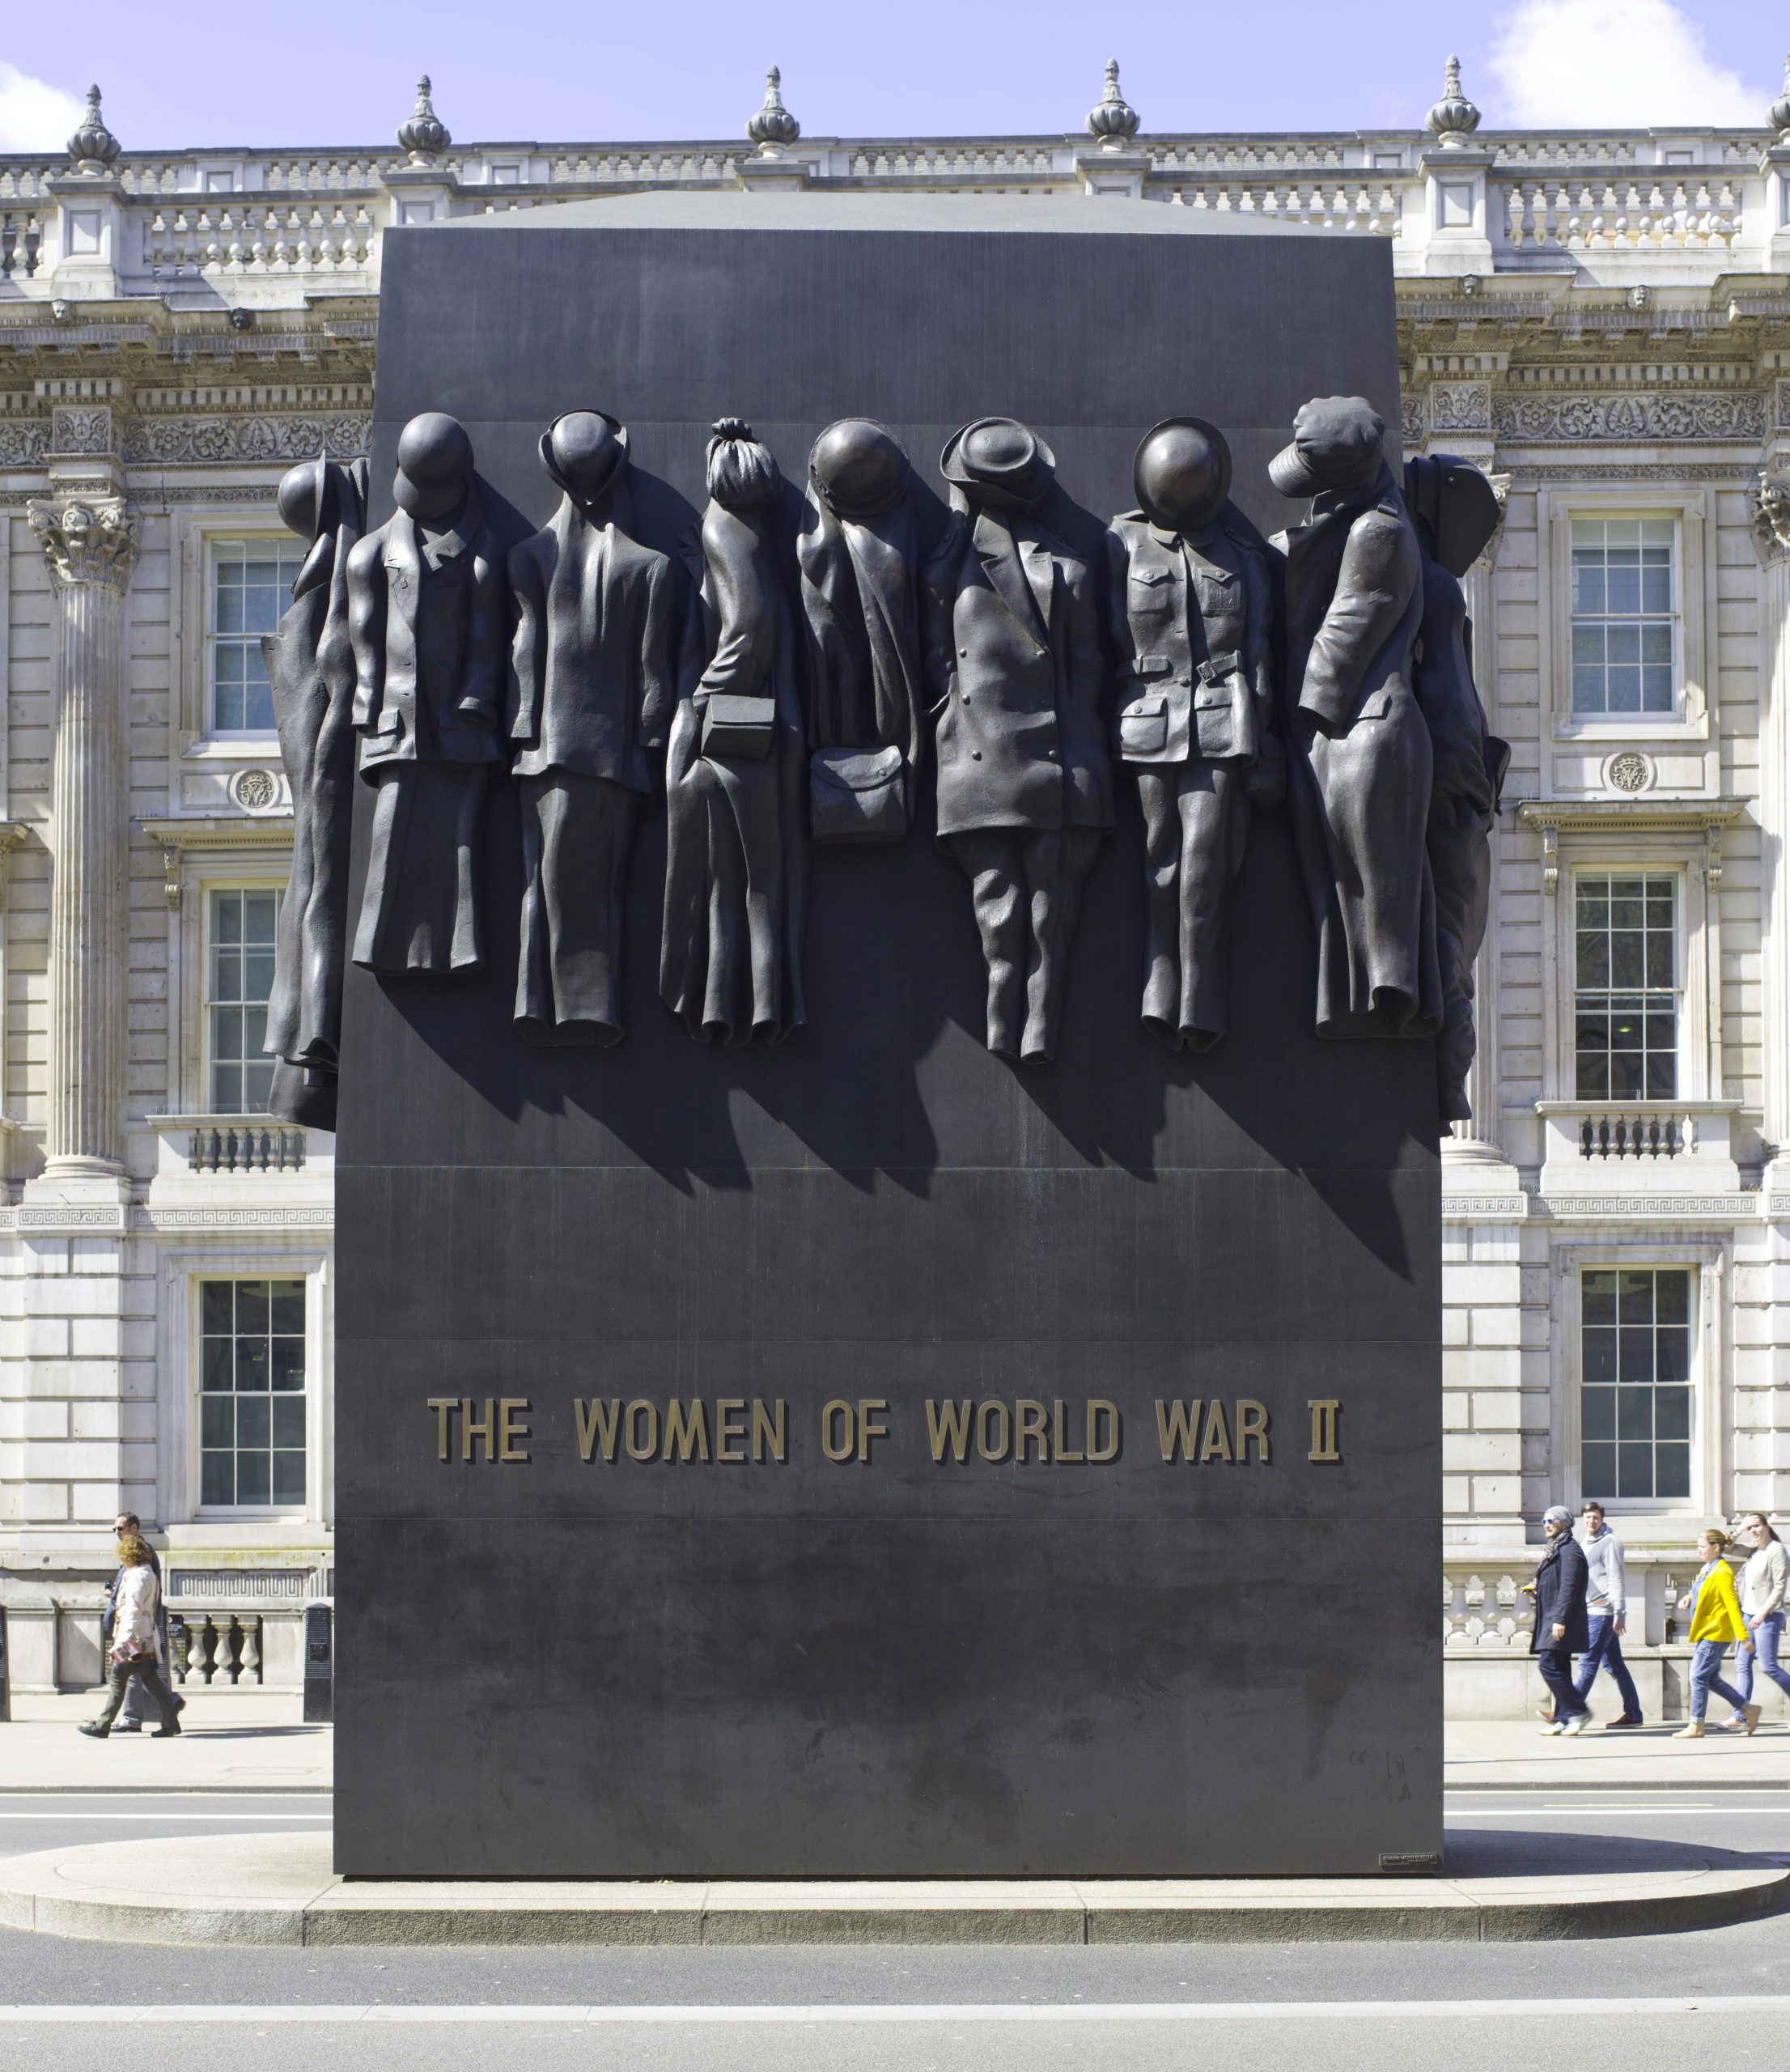 Monument to the Women of World War II is located on Whitehall in London. Sculpted by John W. Mills, the work is 22 feet (6.7 m) high, 16 feet (4.9 m) long, and 6 feet (1.8 m) wide. It is a row of statues of women's war clothing